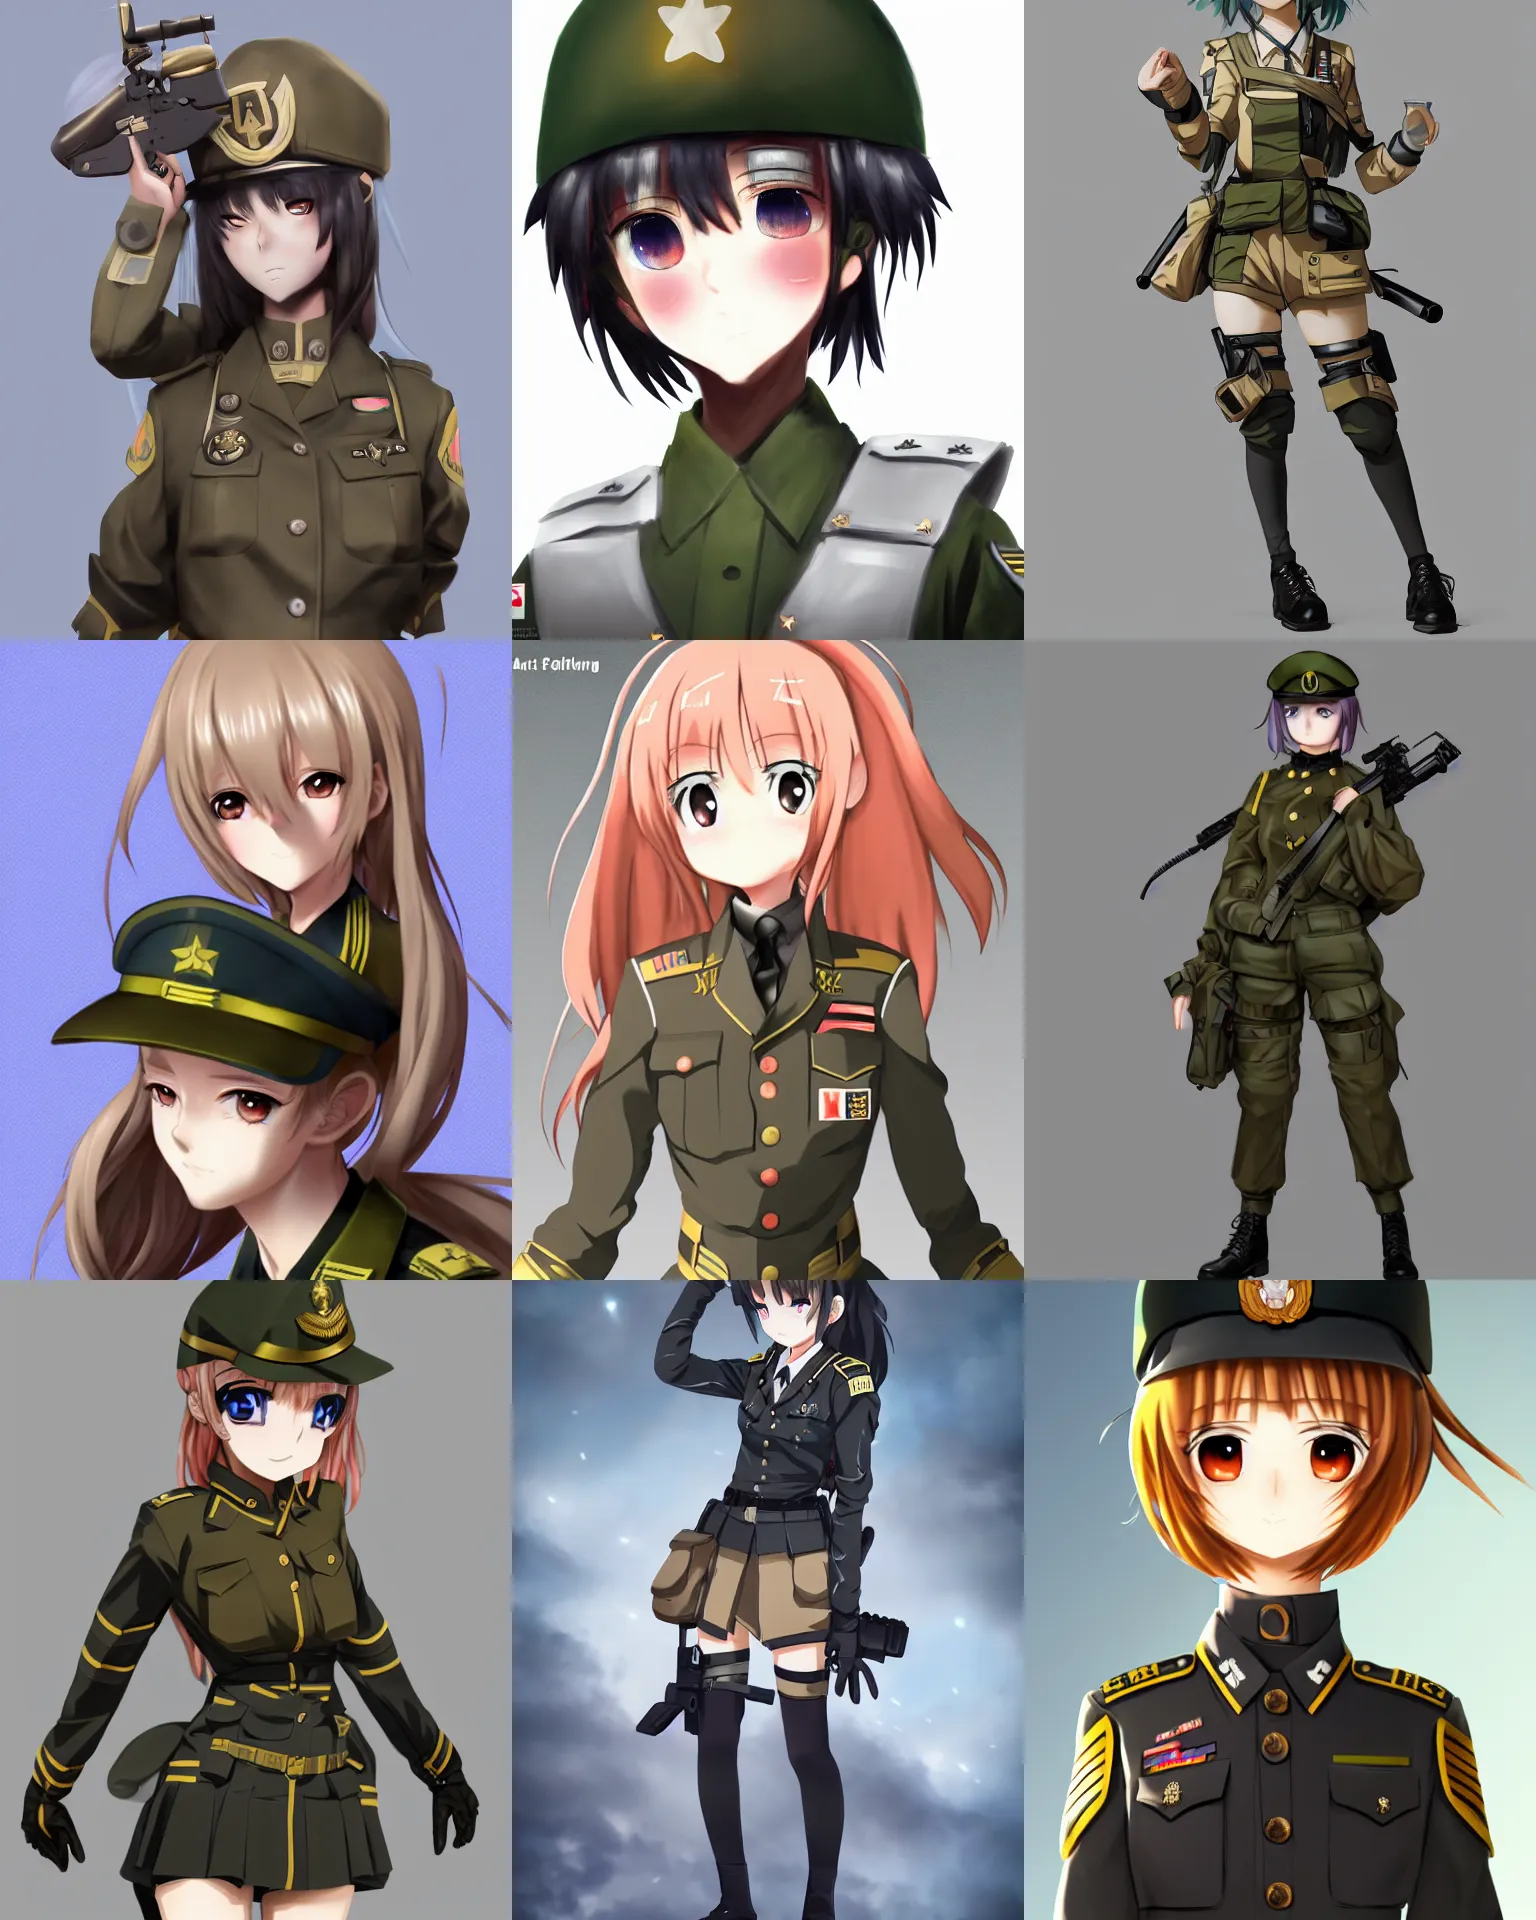 Medieval Military Uniforms - Anime Outfit Inspiration